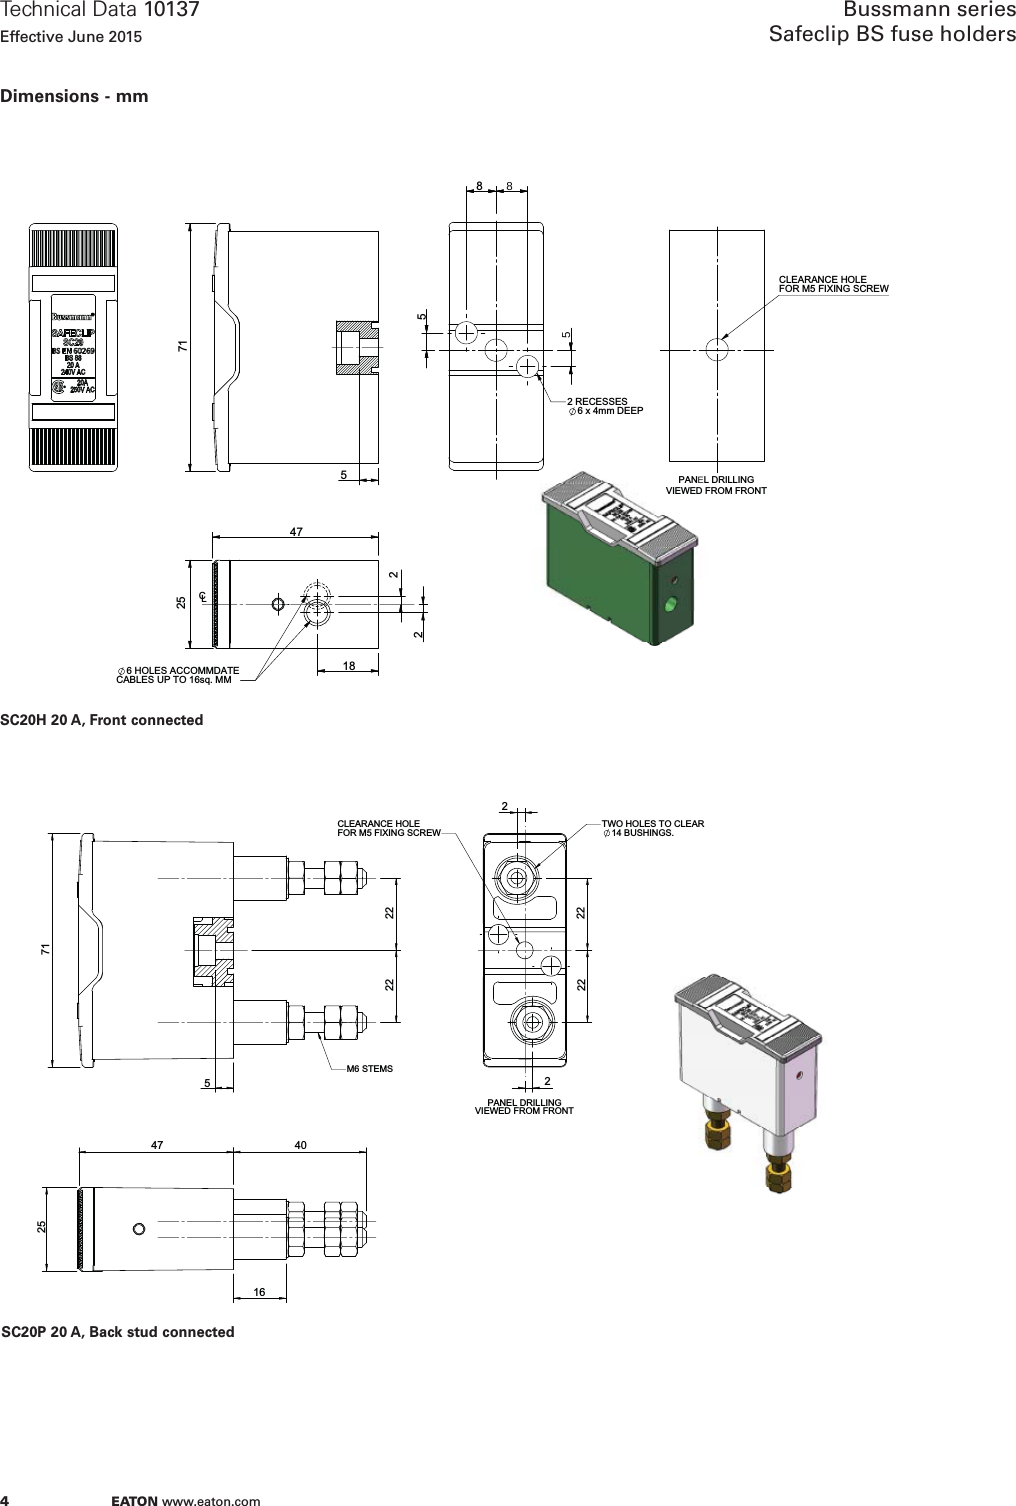 Page 4 of 10 - Bus-iec-ds-10137-safeclipfuseholders  Brochure